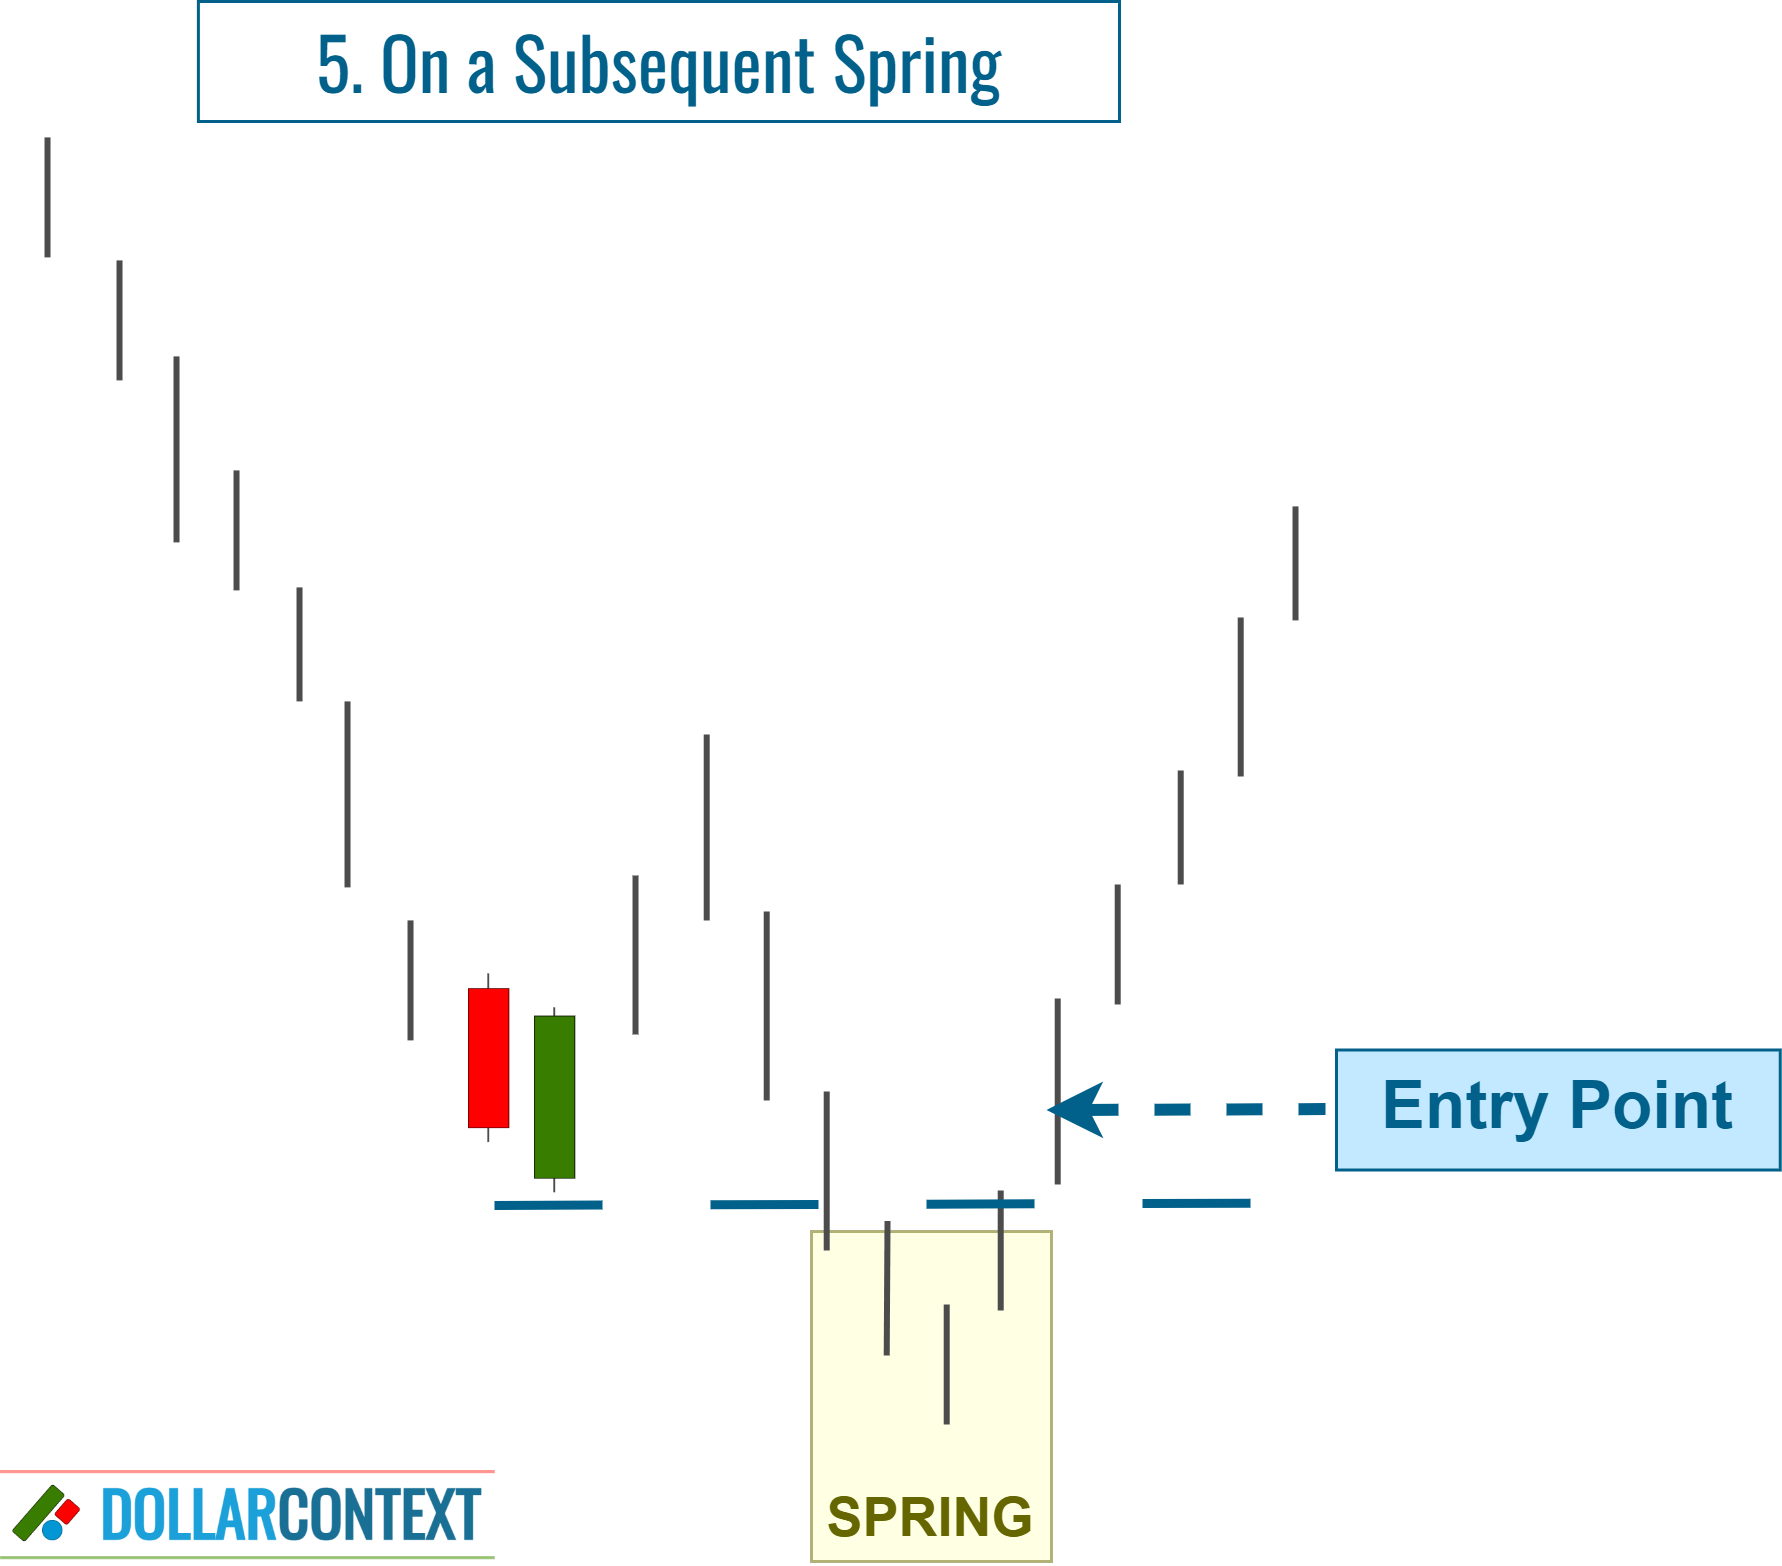 Piercing Pattern: Entry After a Spring (False Breakout)